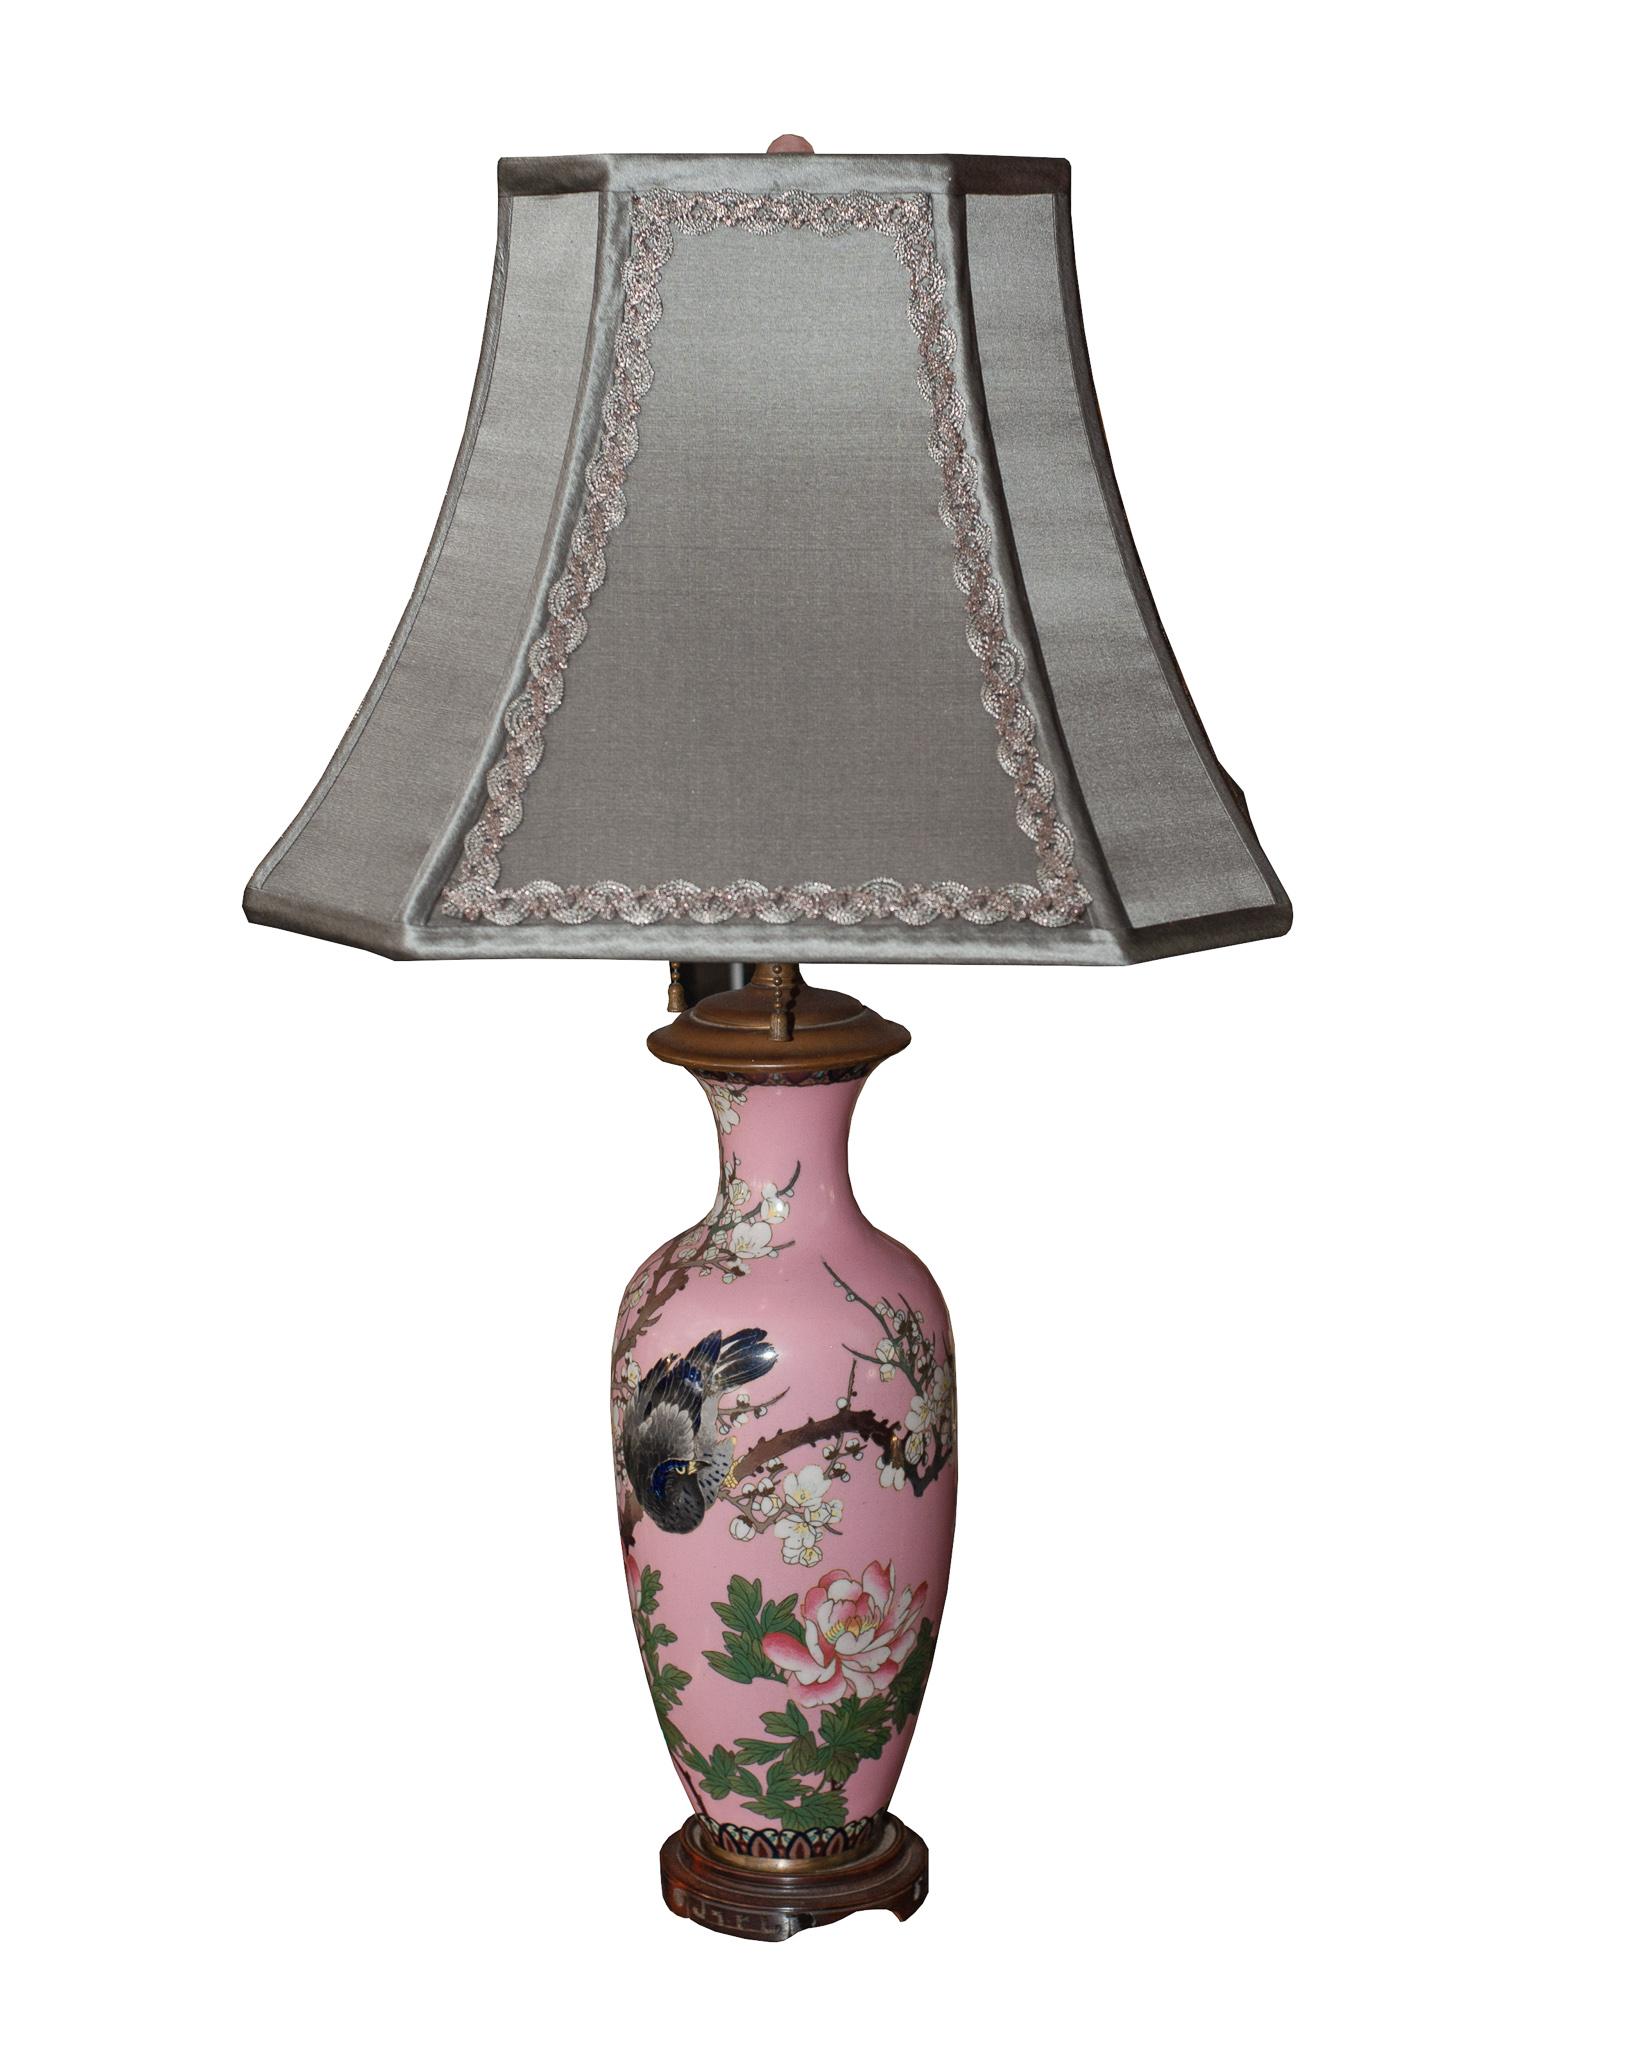 This pair of antique Japanese porcelain lamps are extremely rare and valuable not only for their artistry but for their beautiful uncommon pink color. Pottery and porcelain are one of the oldest Japanese crafts and art forms, dating back to the